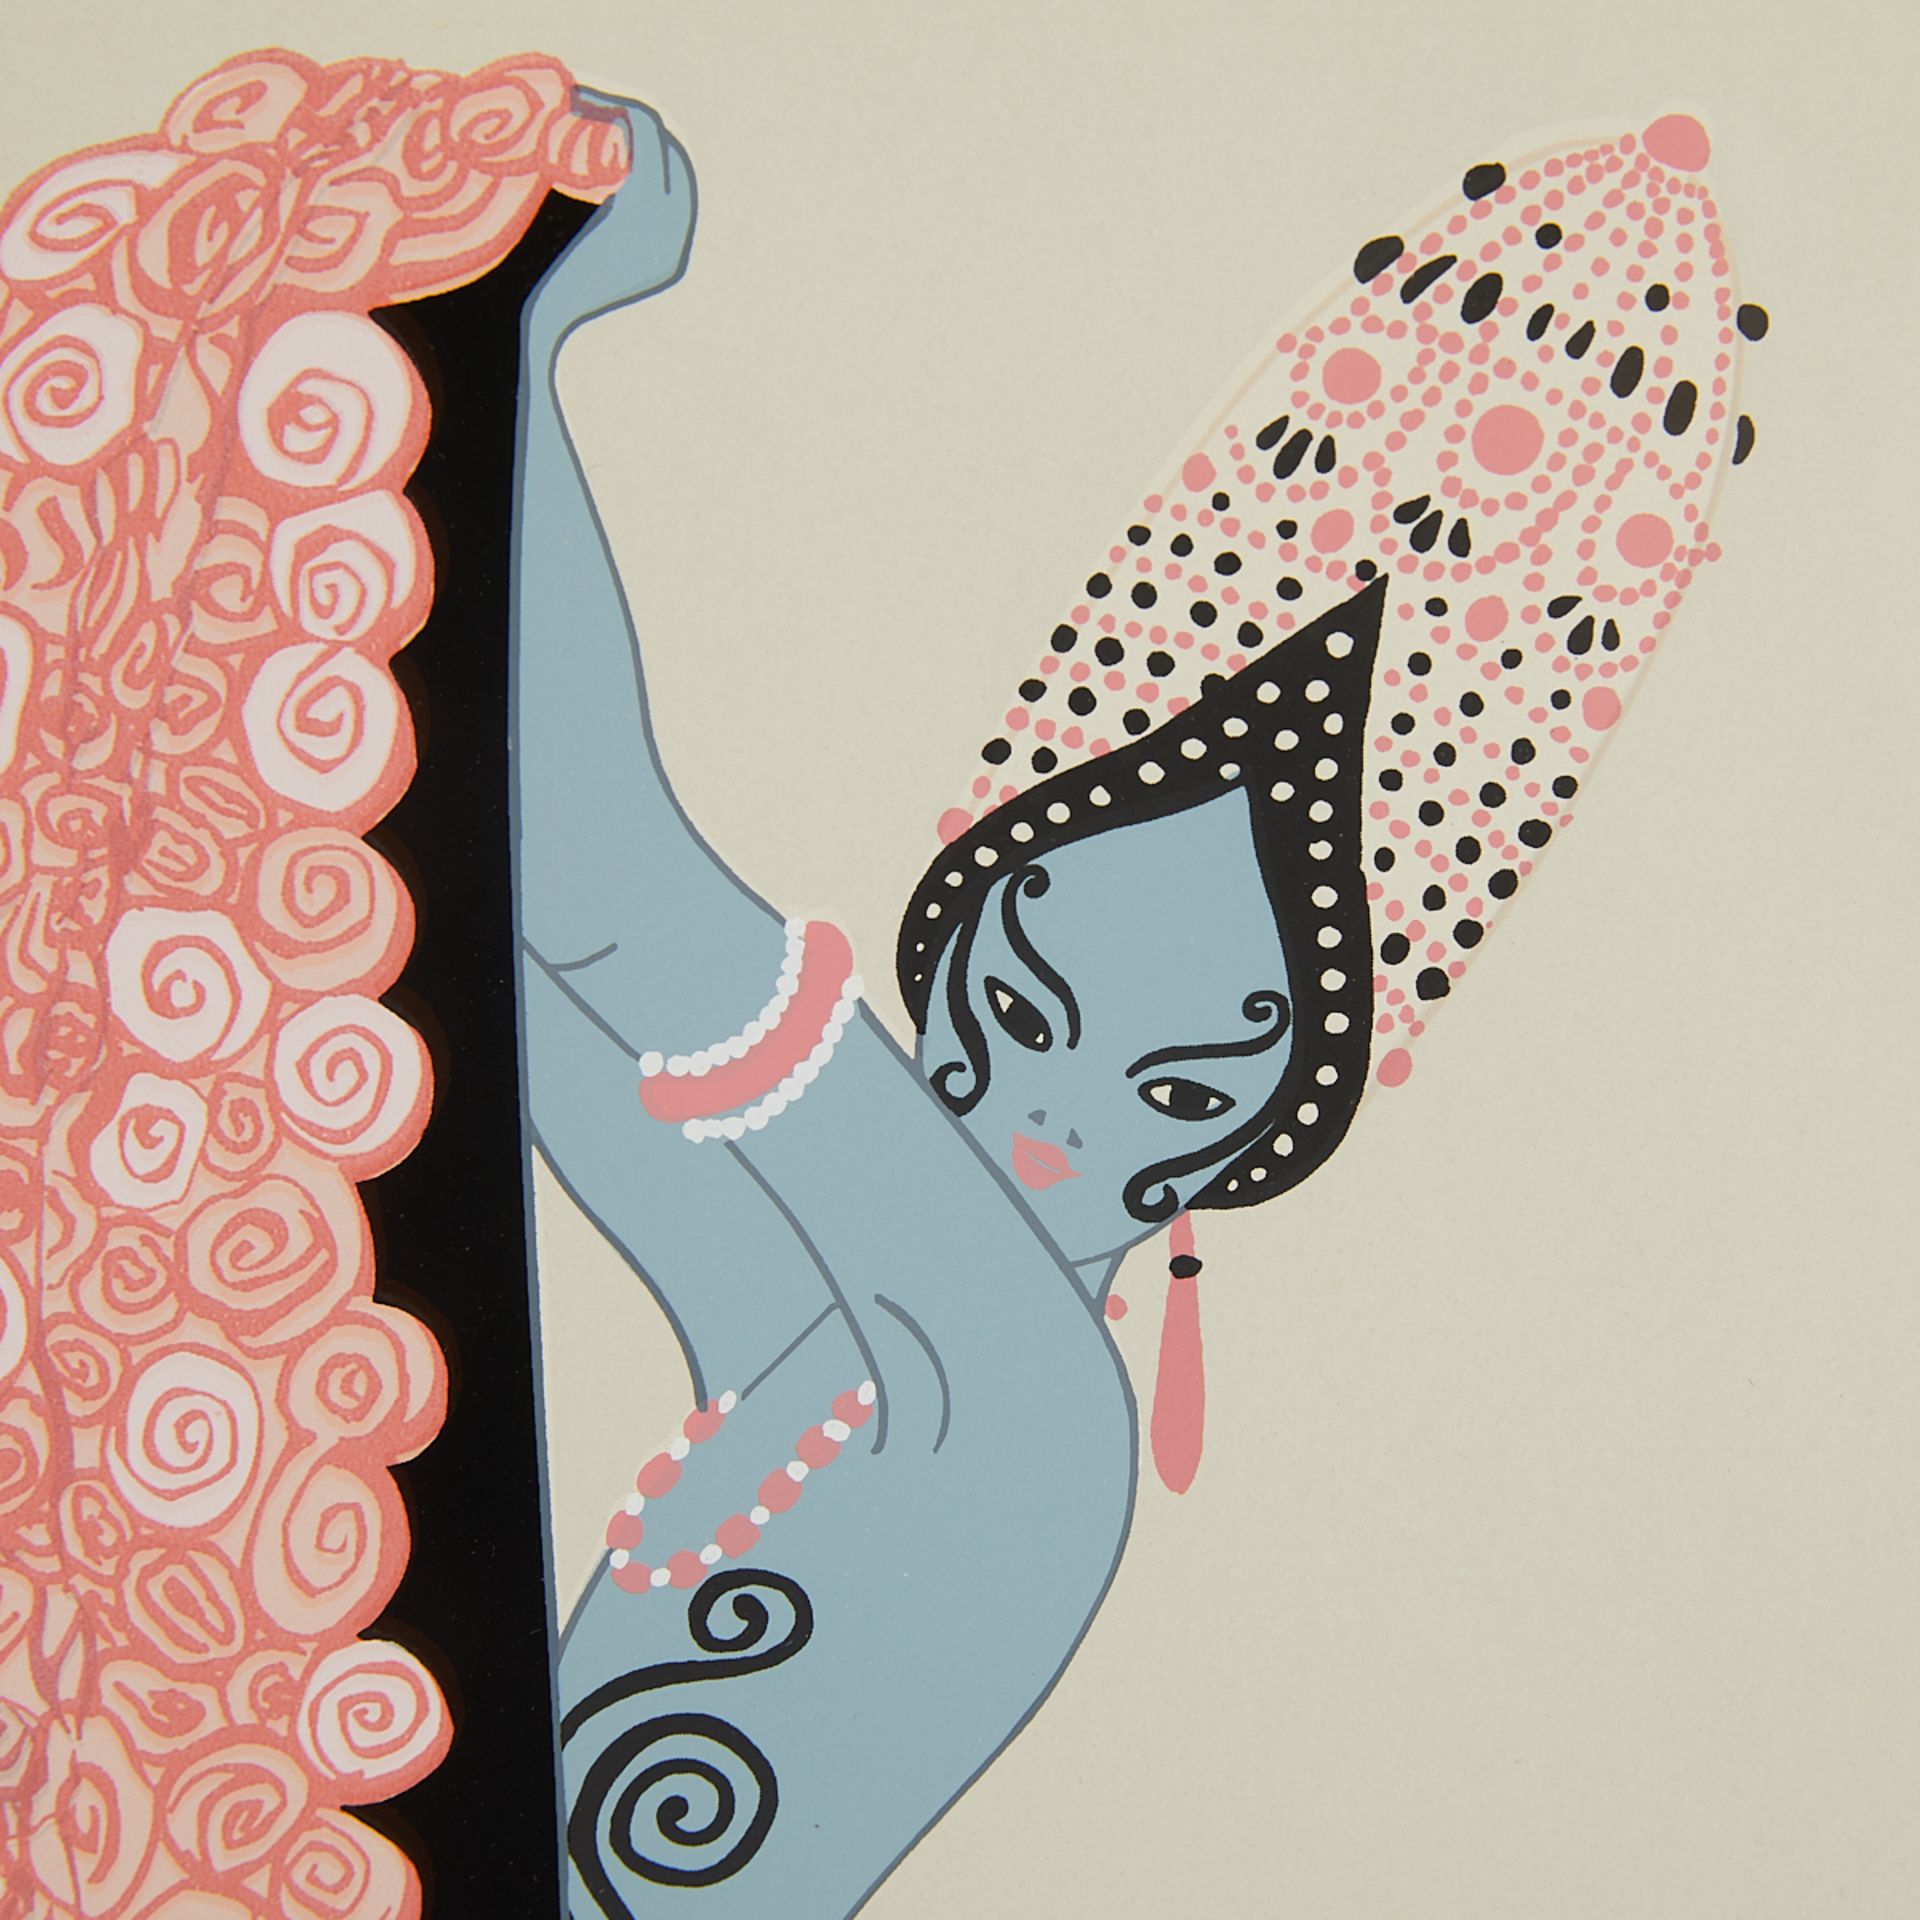 Erte "The Flowered Cape" Serigraph 1981 - Image 5 of 9